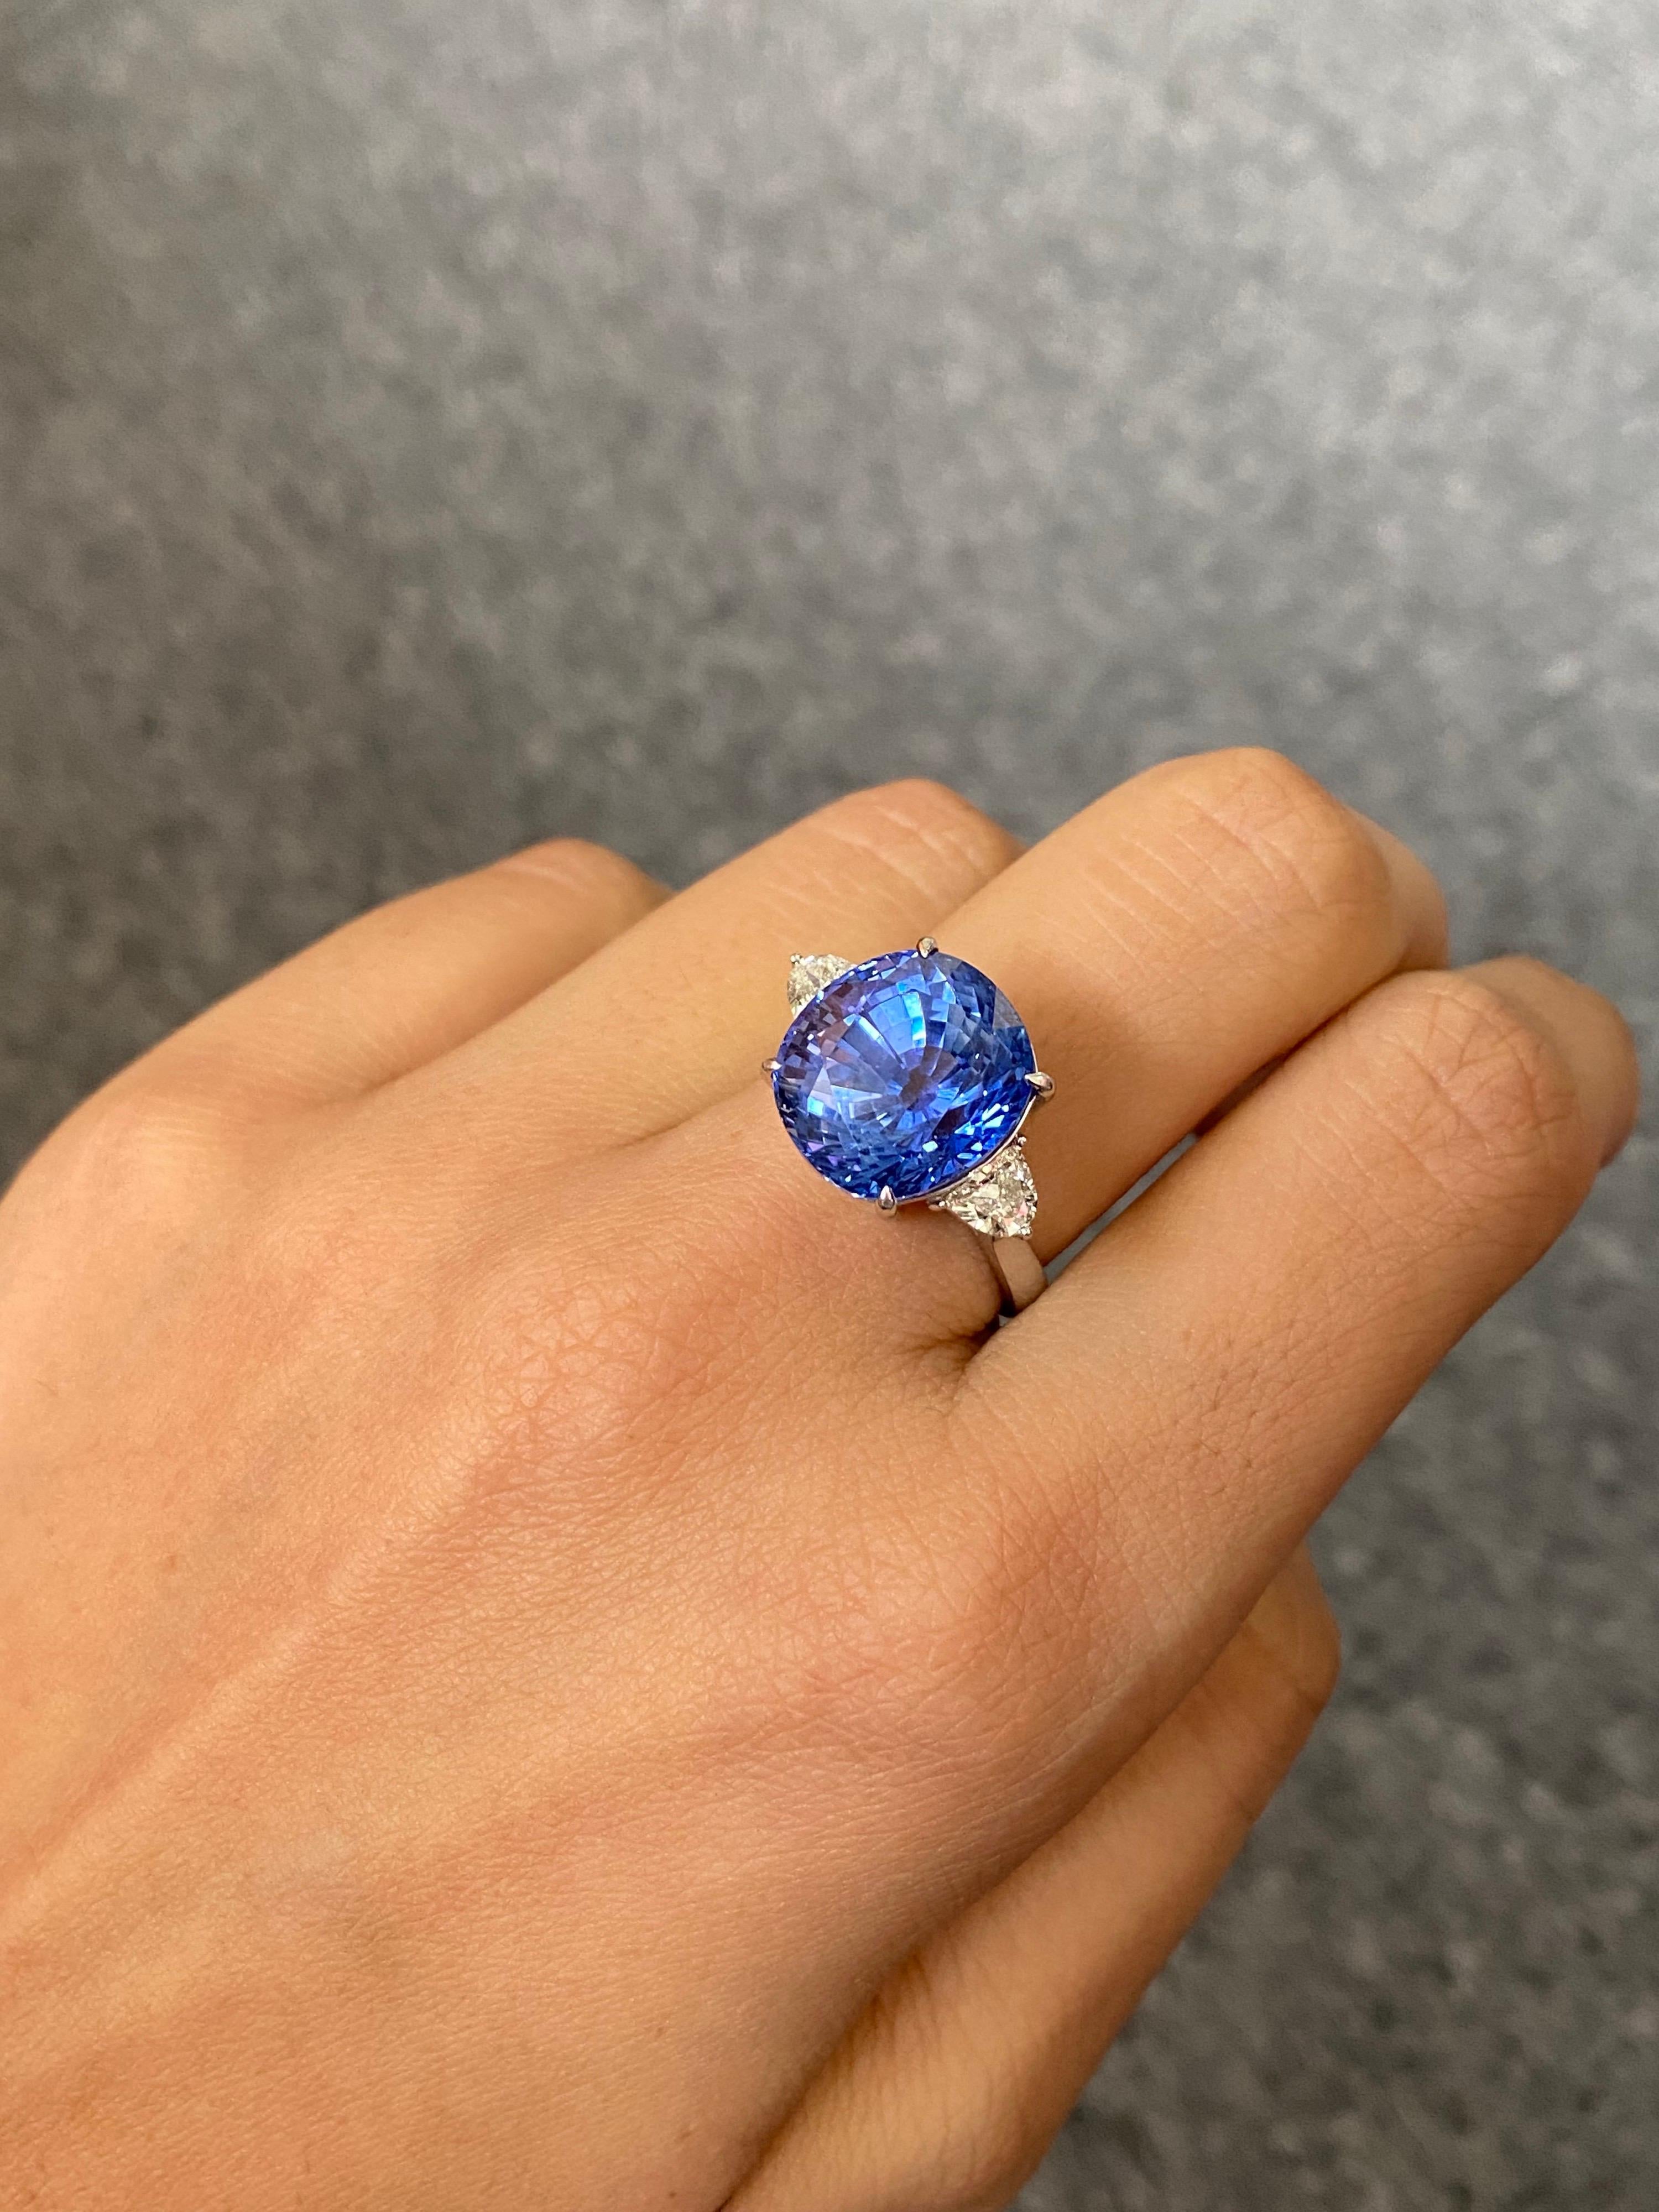 A stunning, 12.57 carat natural Ceylon (Sri Lankan) Sapphire and 0.51 carat VS quality White Diamond three-stone cocktail ring, set in 18K White Gold. The Blue Sapphire is absolutely transparent, has an amazing luster and ideal colour. The ring is